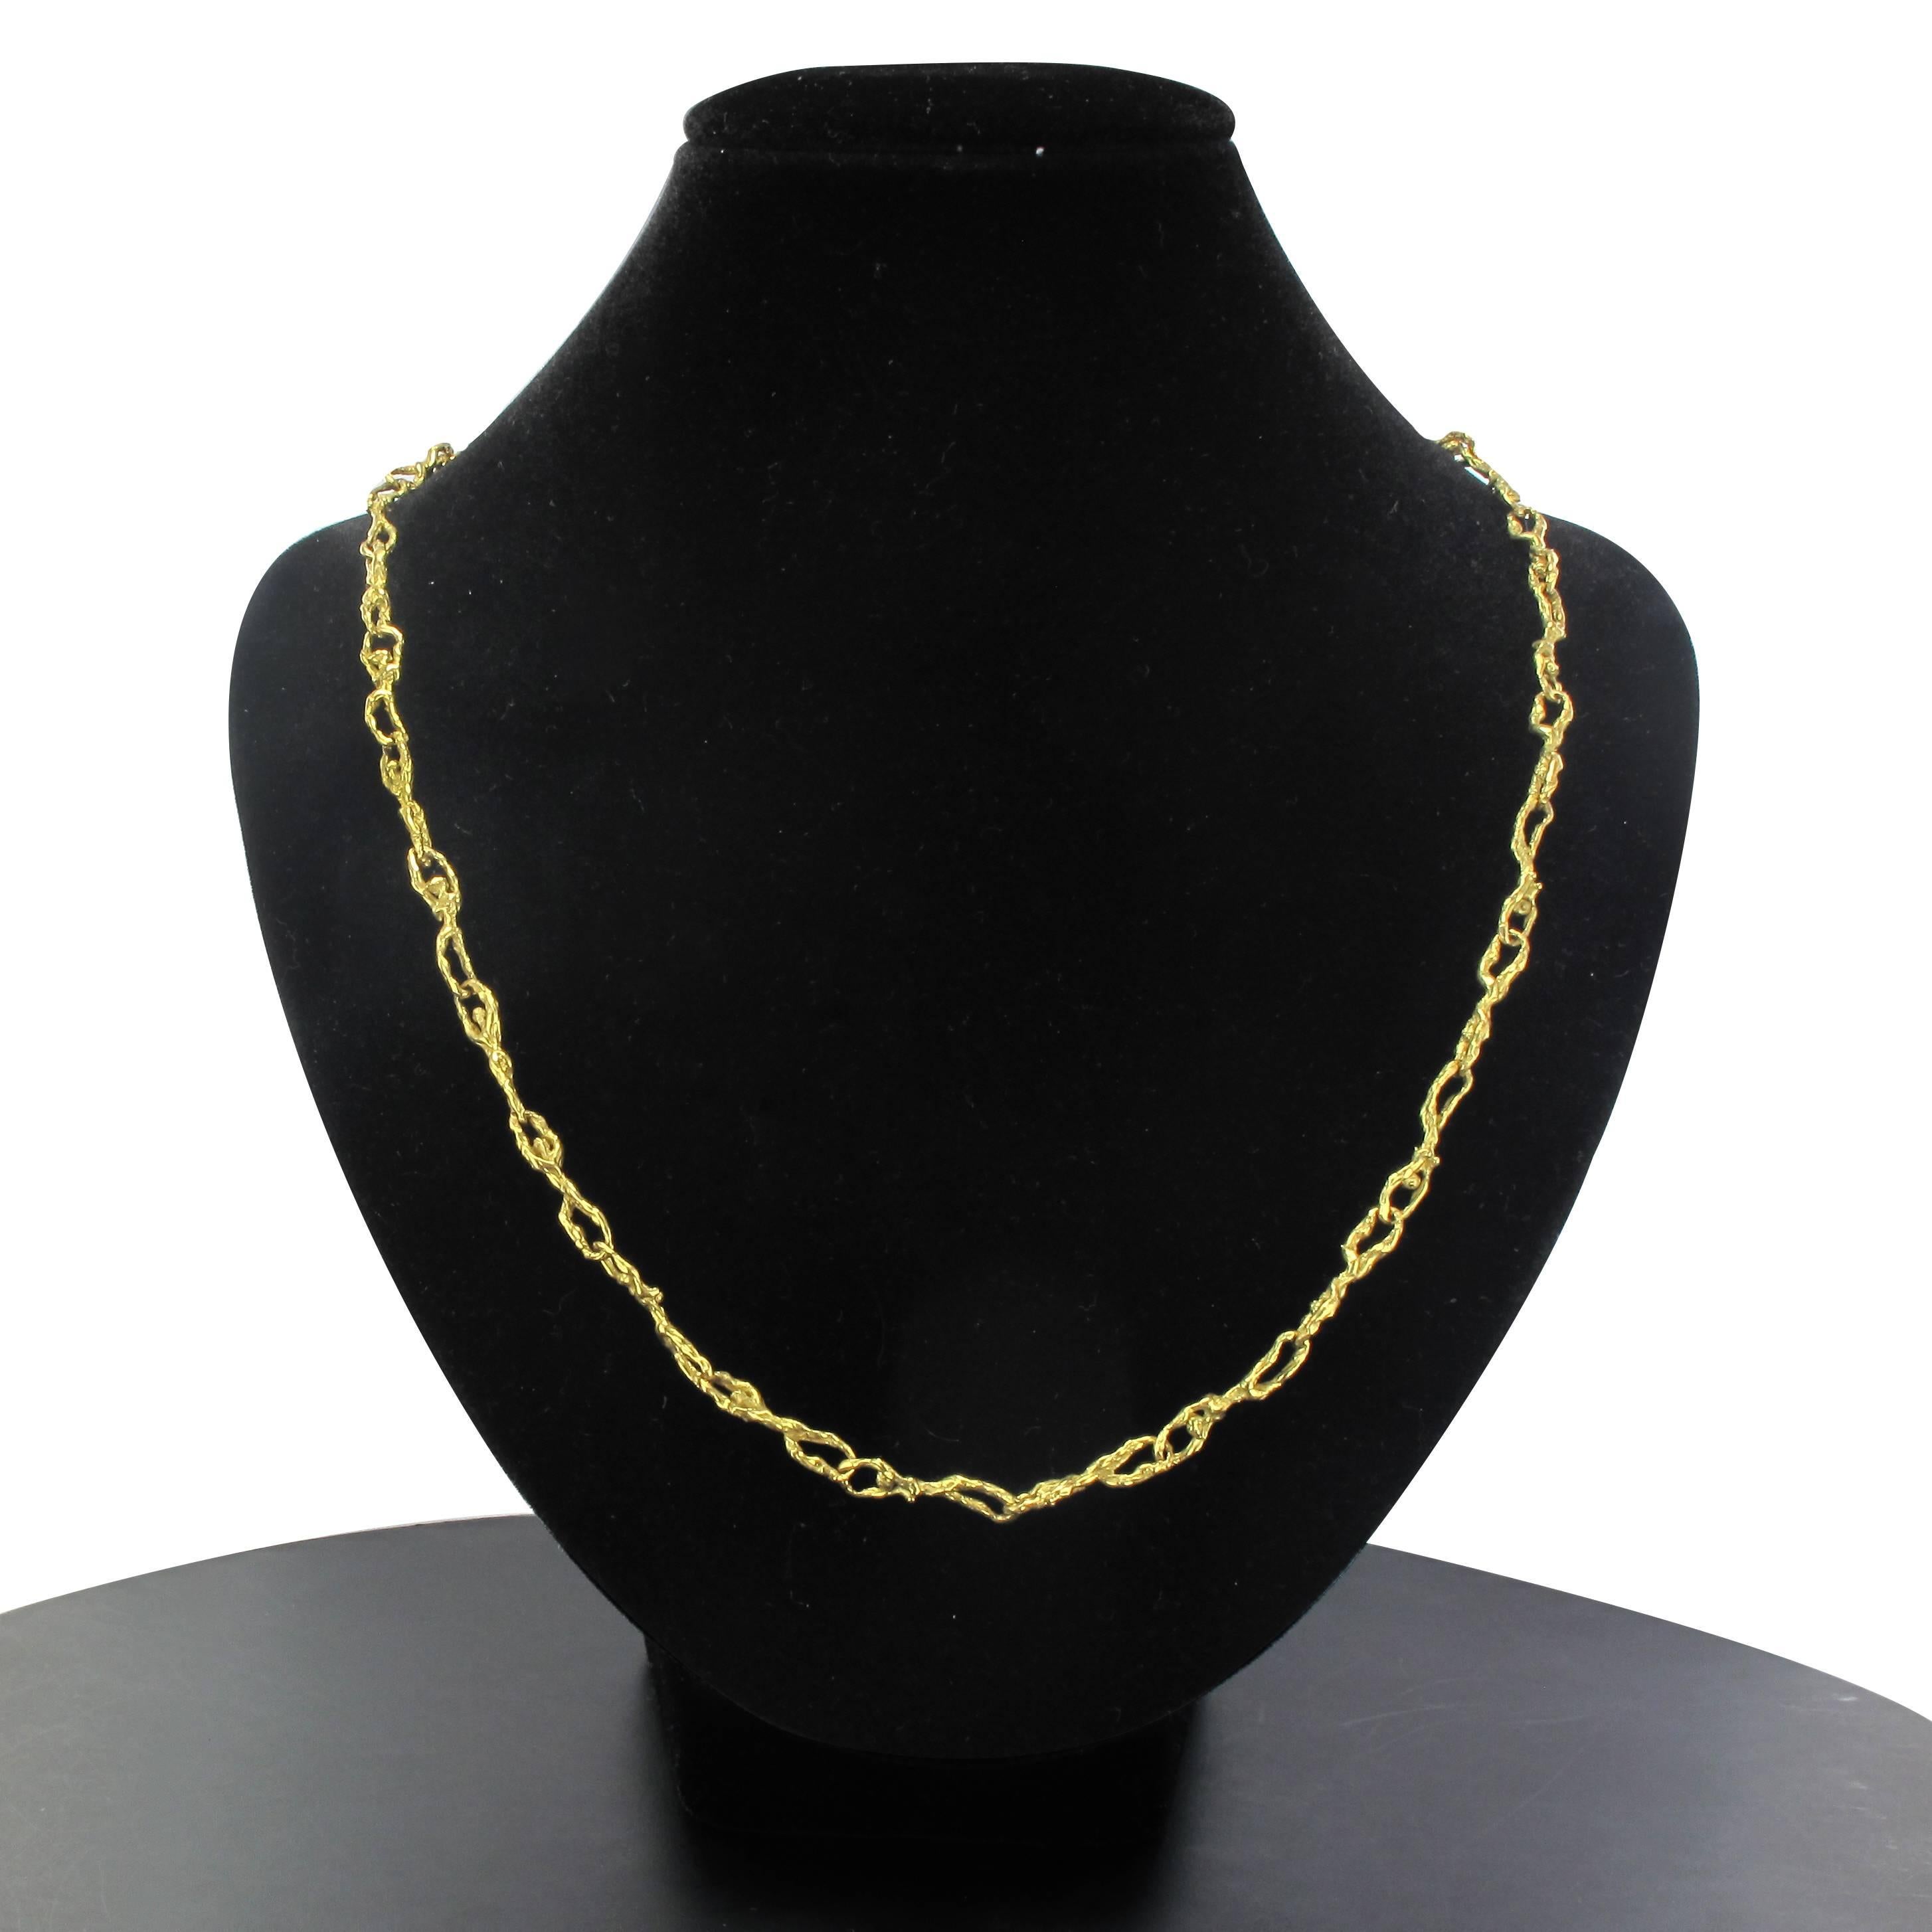 18 carat Yellow Gold Necklace.

This splendid and original yellow gold necklace is composed of designs in the form of people whose arms and legs form the links between them. The clasp is in the form of a hook. 

Length : 62.5 cm, width: 4